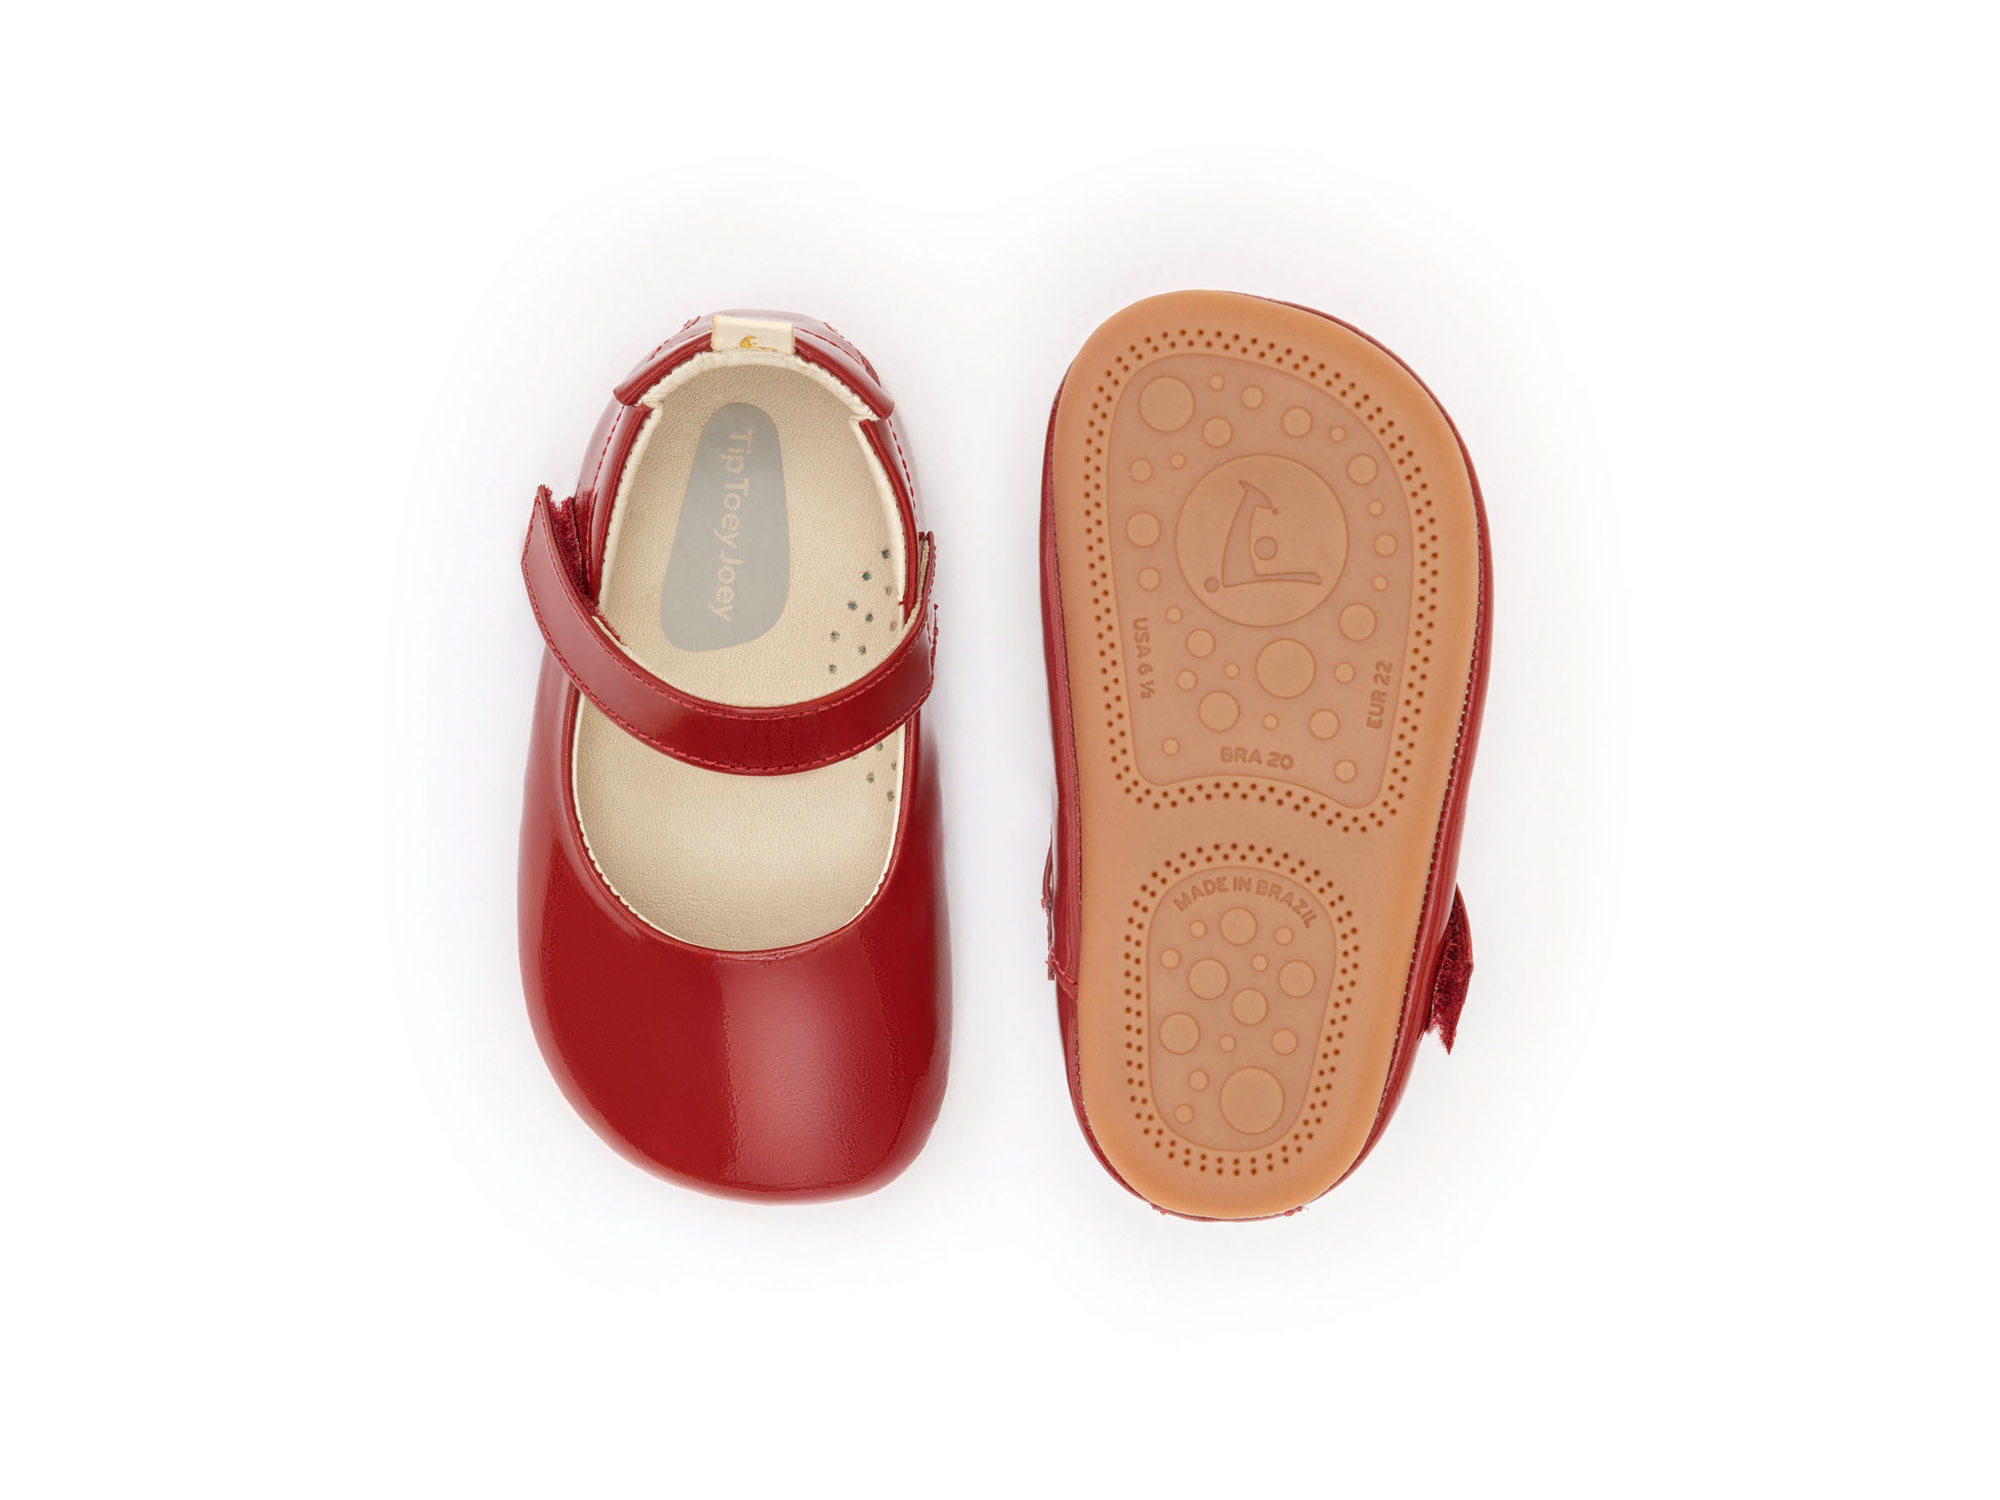 UP & GO Mary Janes for Girls Dolly | Tip Toey Joey - Australia - 2